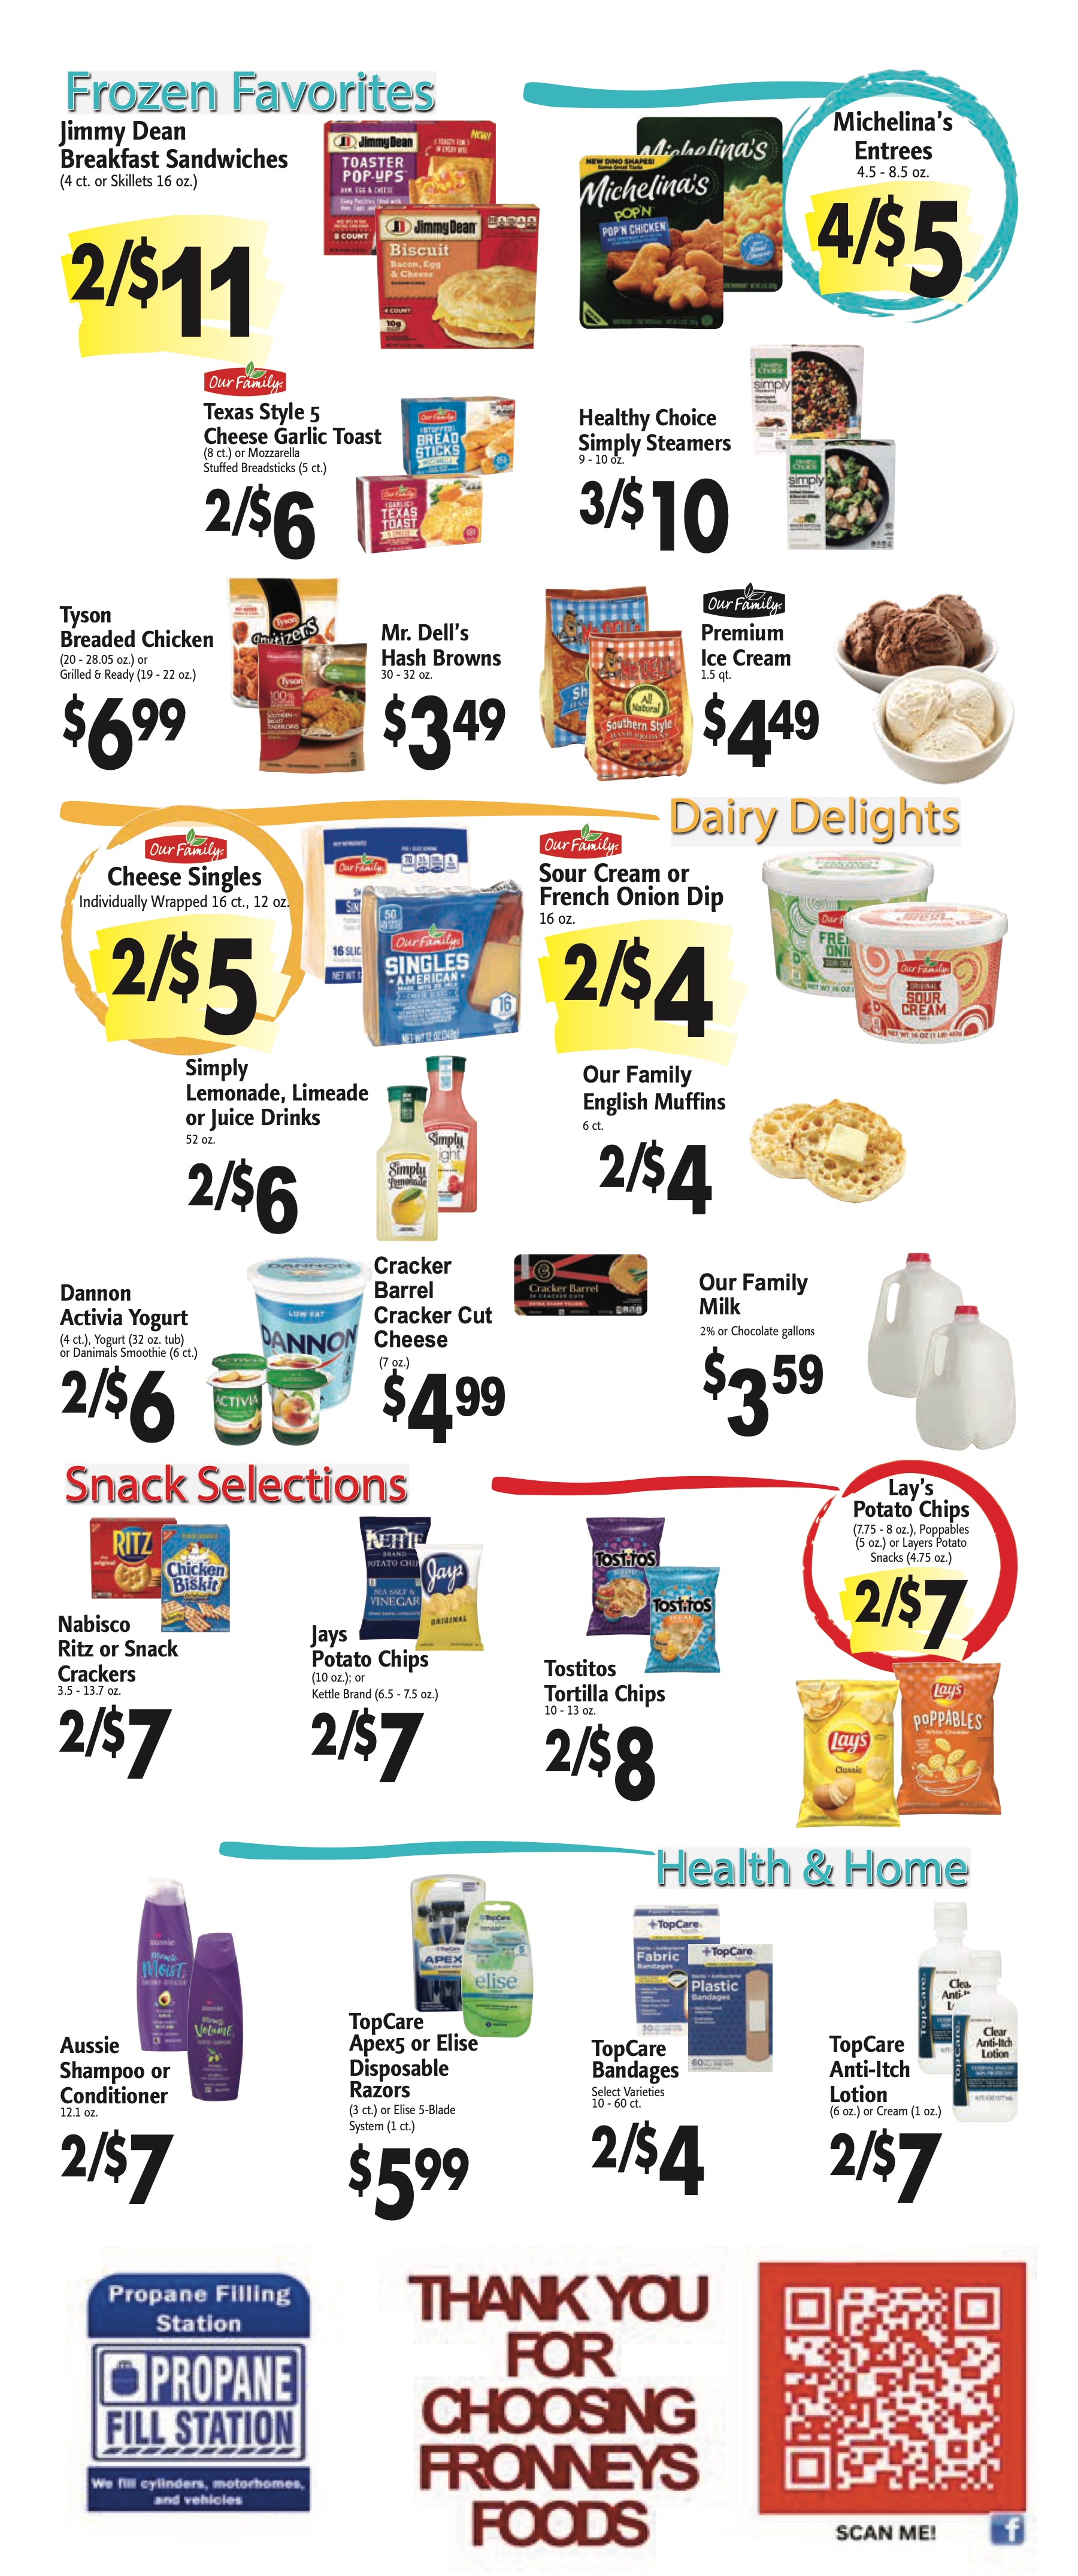 Weekly ad circular Fronney's Foods